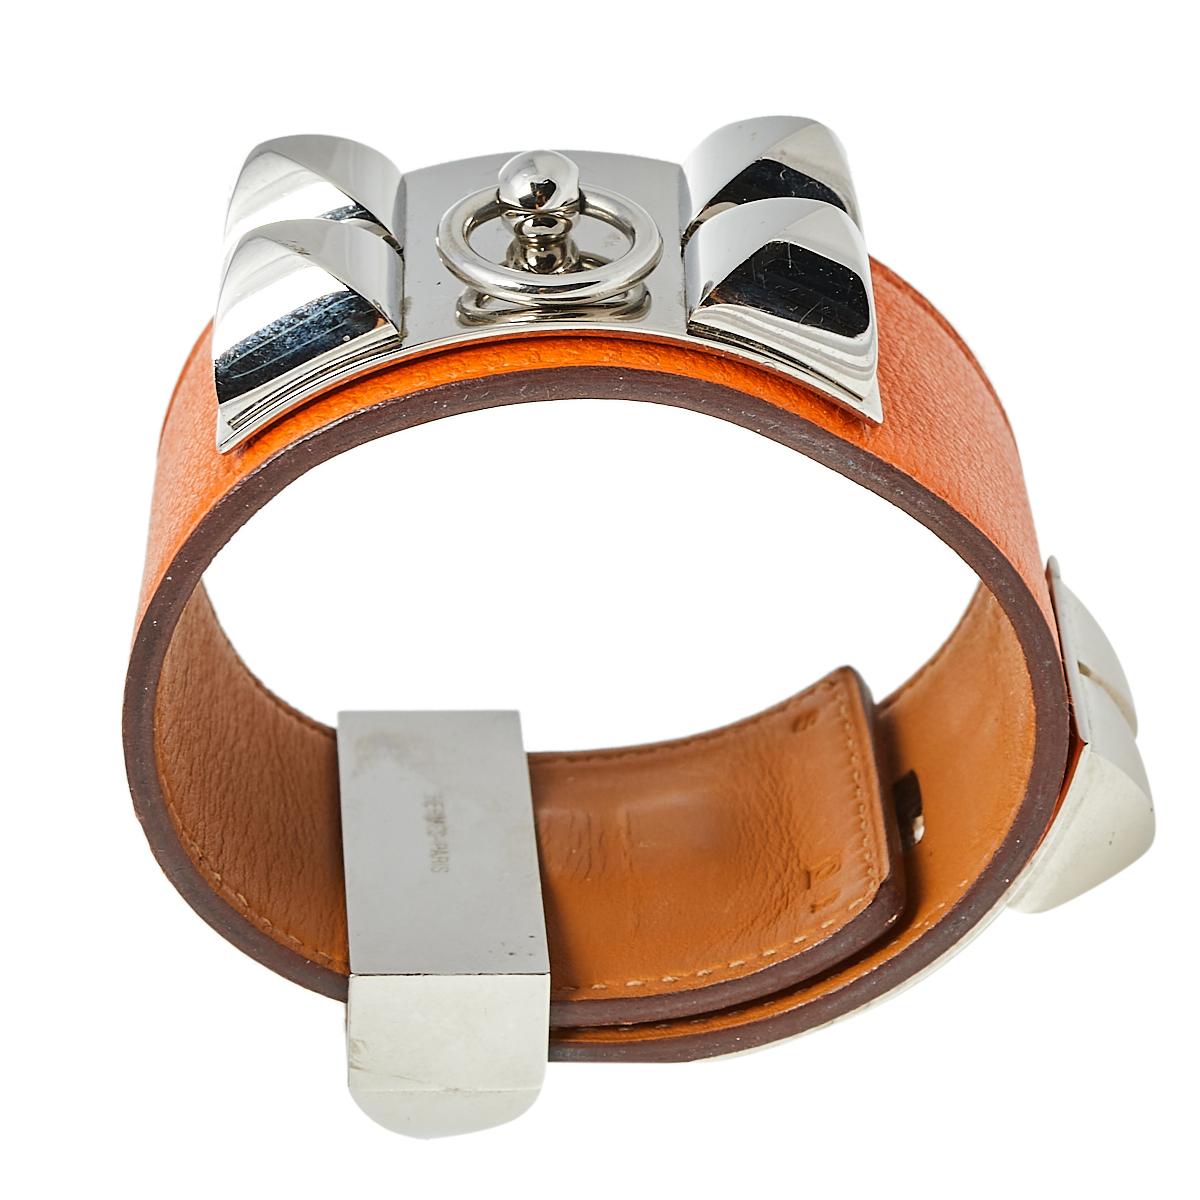 Exuding a downtown, punk vibe, this instantly recognizable bracelet is from the signature Collier de Chien collection of Hermès. The bracelet, made of leather, is adorned with the iconic Collier de Chien motif in palladium-plated metal featuring